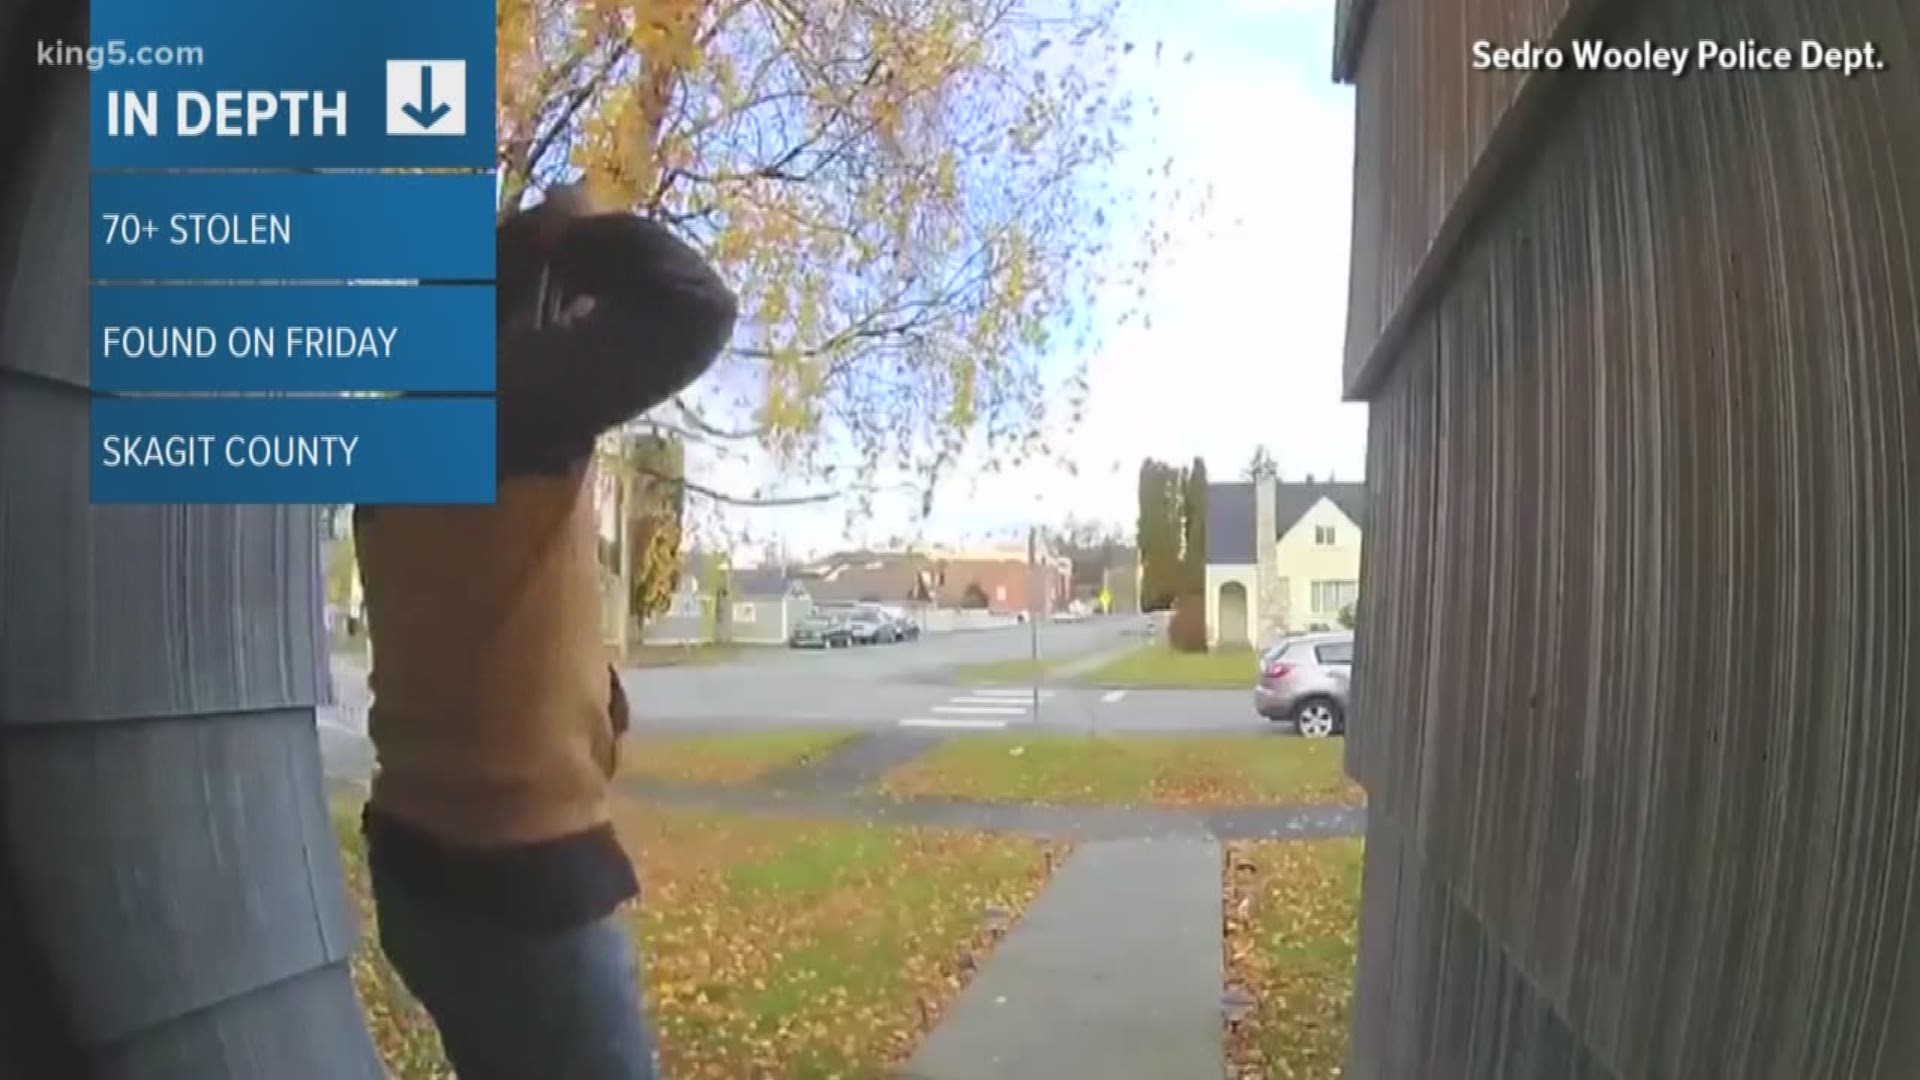 Police say this man stole more than 70 packages off porches in Skagit County. Now, Mt. Vernon police are trying to get the packages back home.